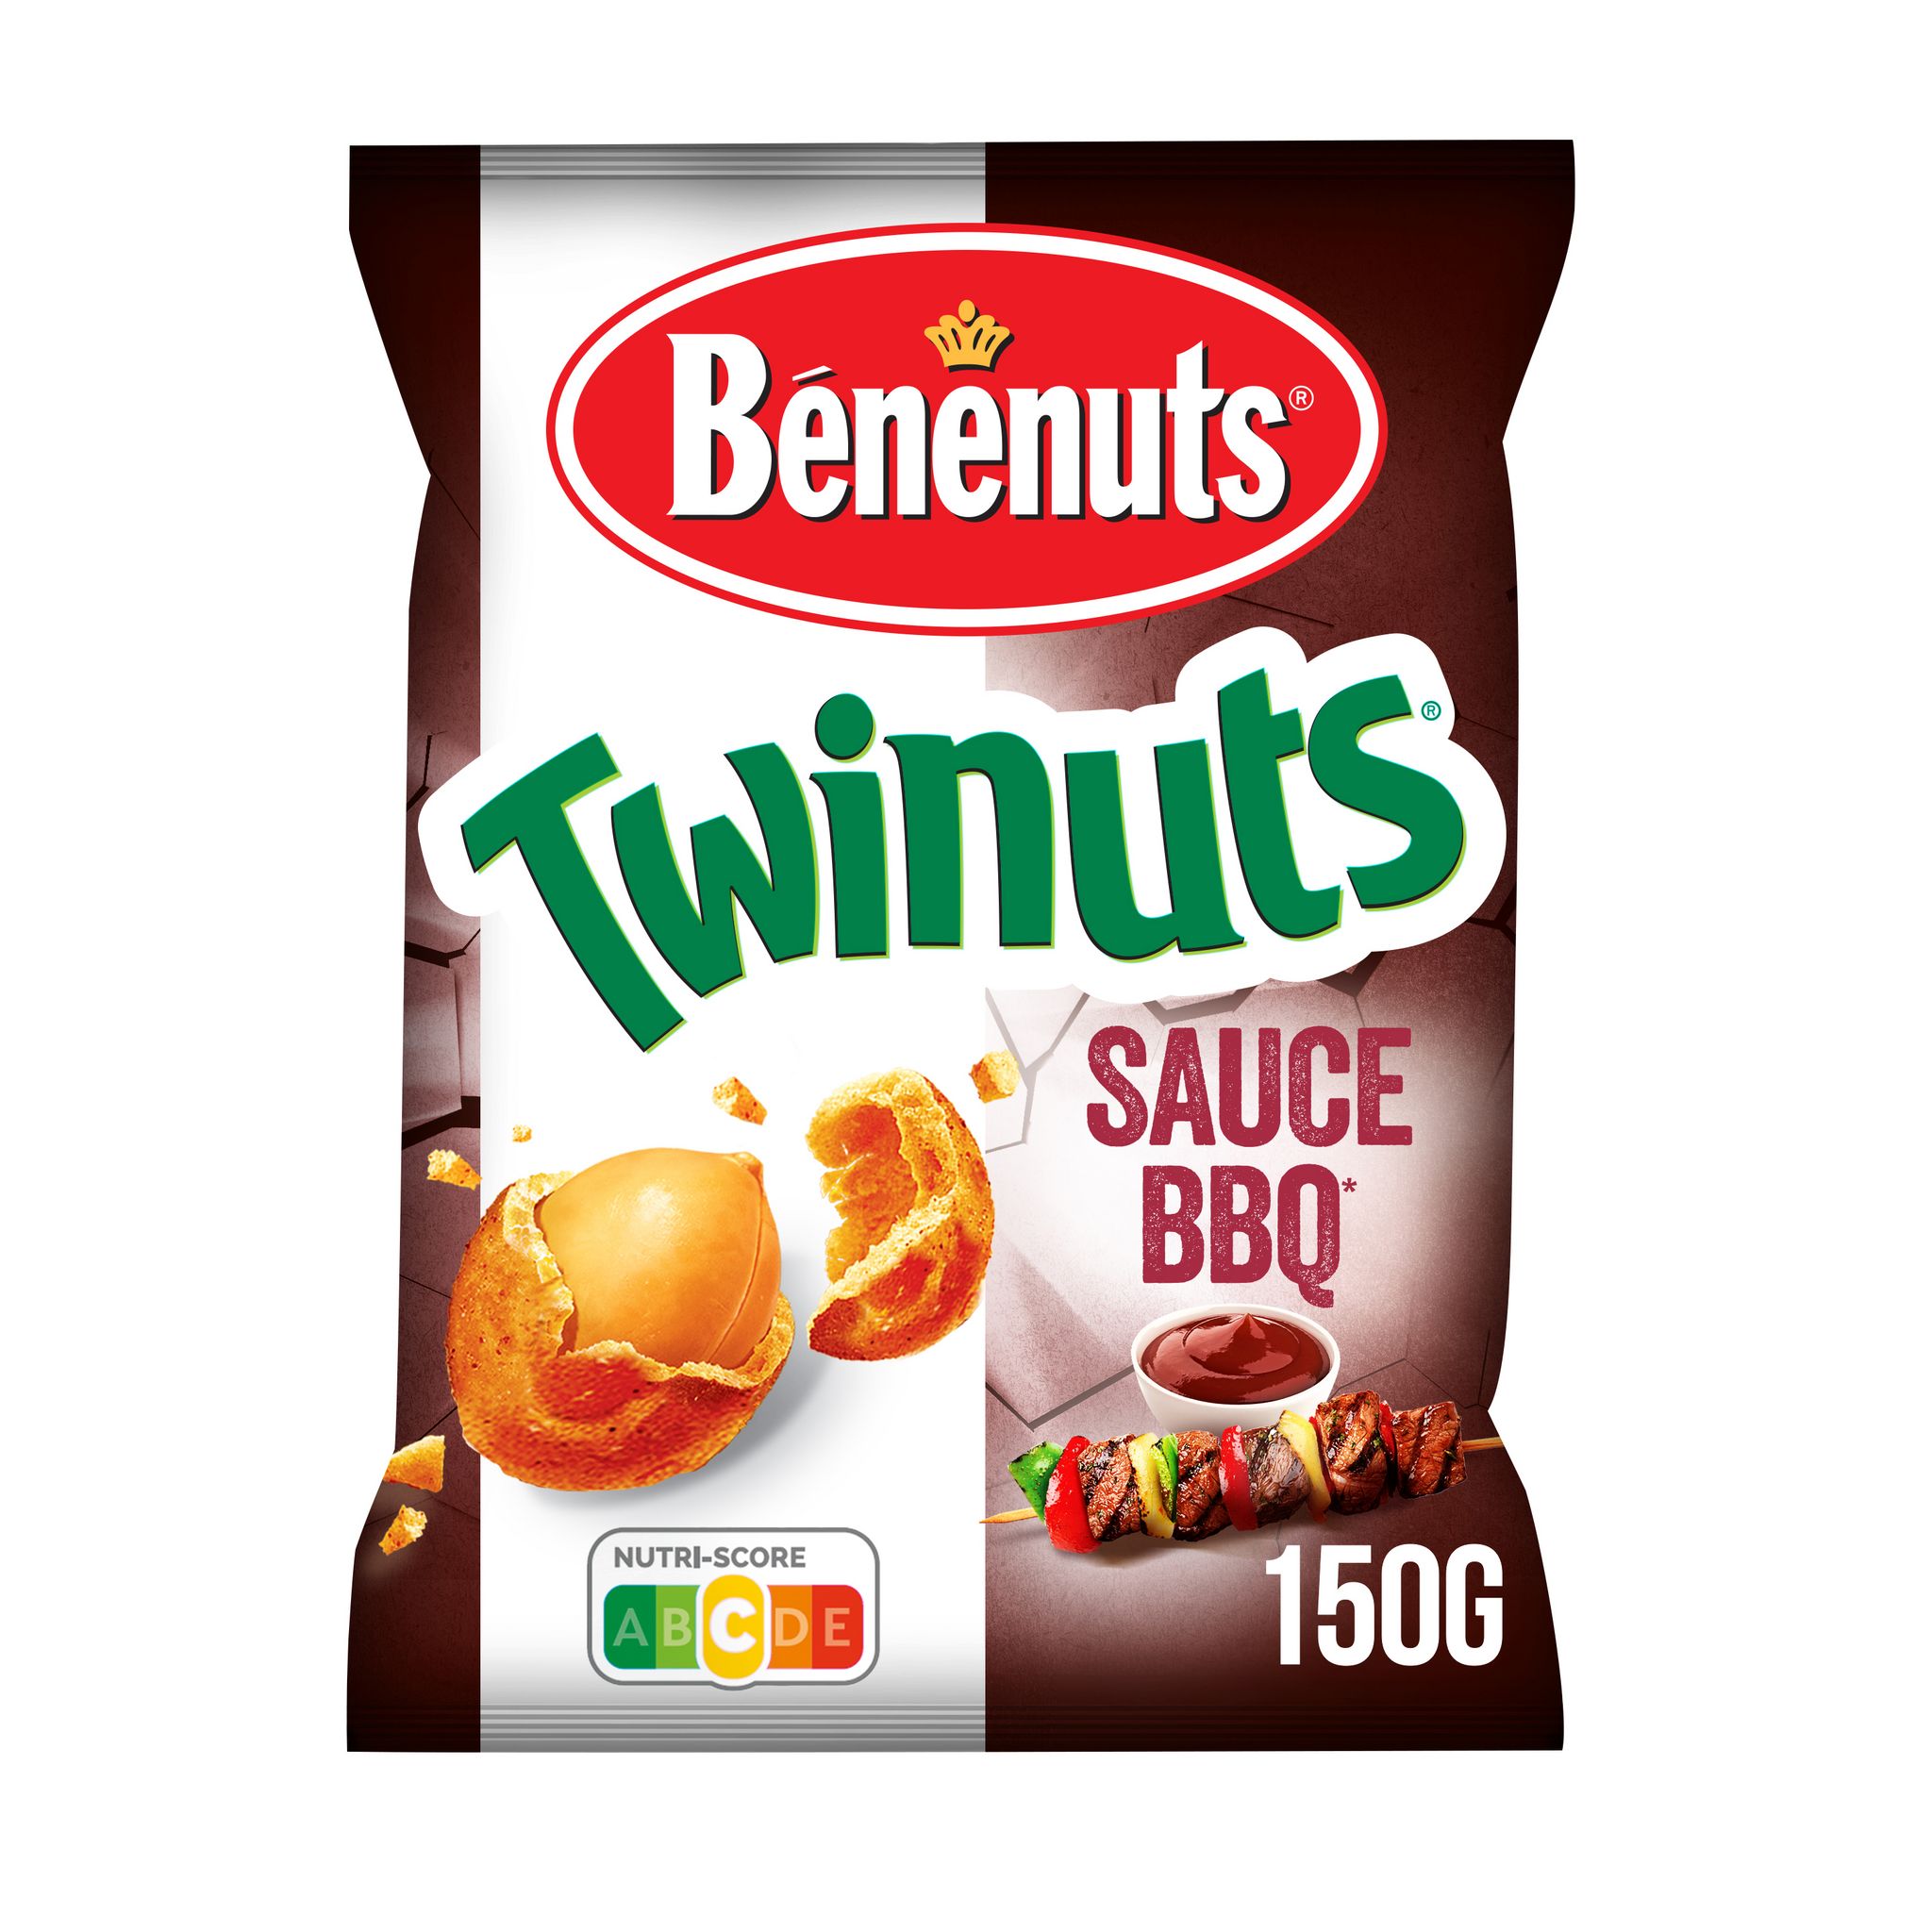 French Click - Benenuts Twinuts Gout Sale 260g